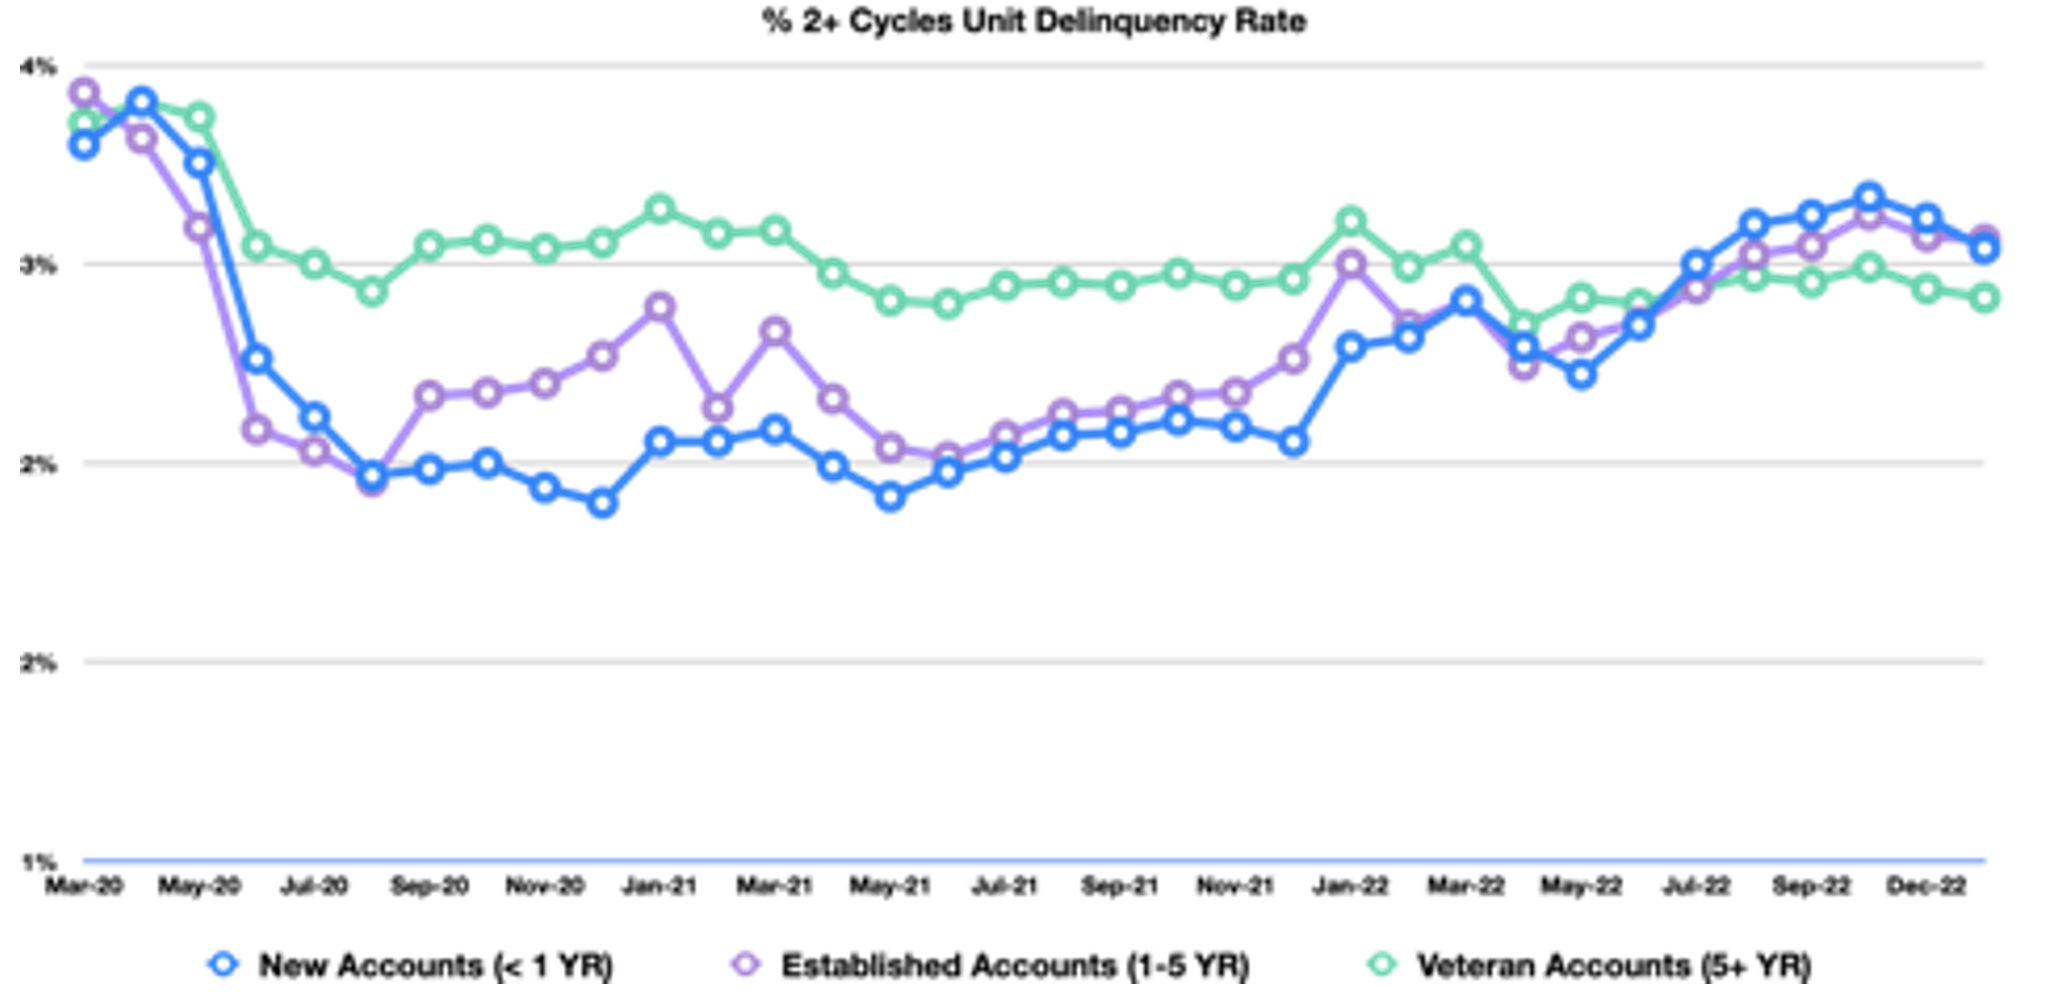 Canada % 2+ Cycles Delinquency Rate by Account Vintage Segment